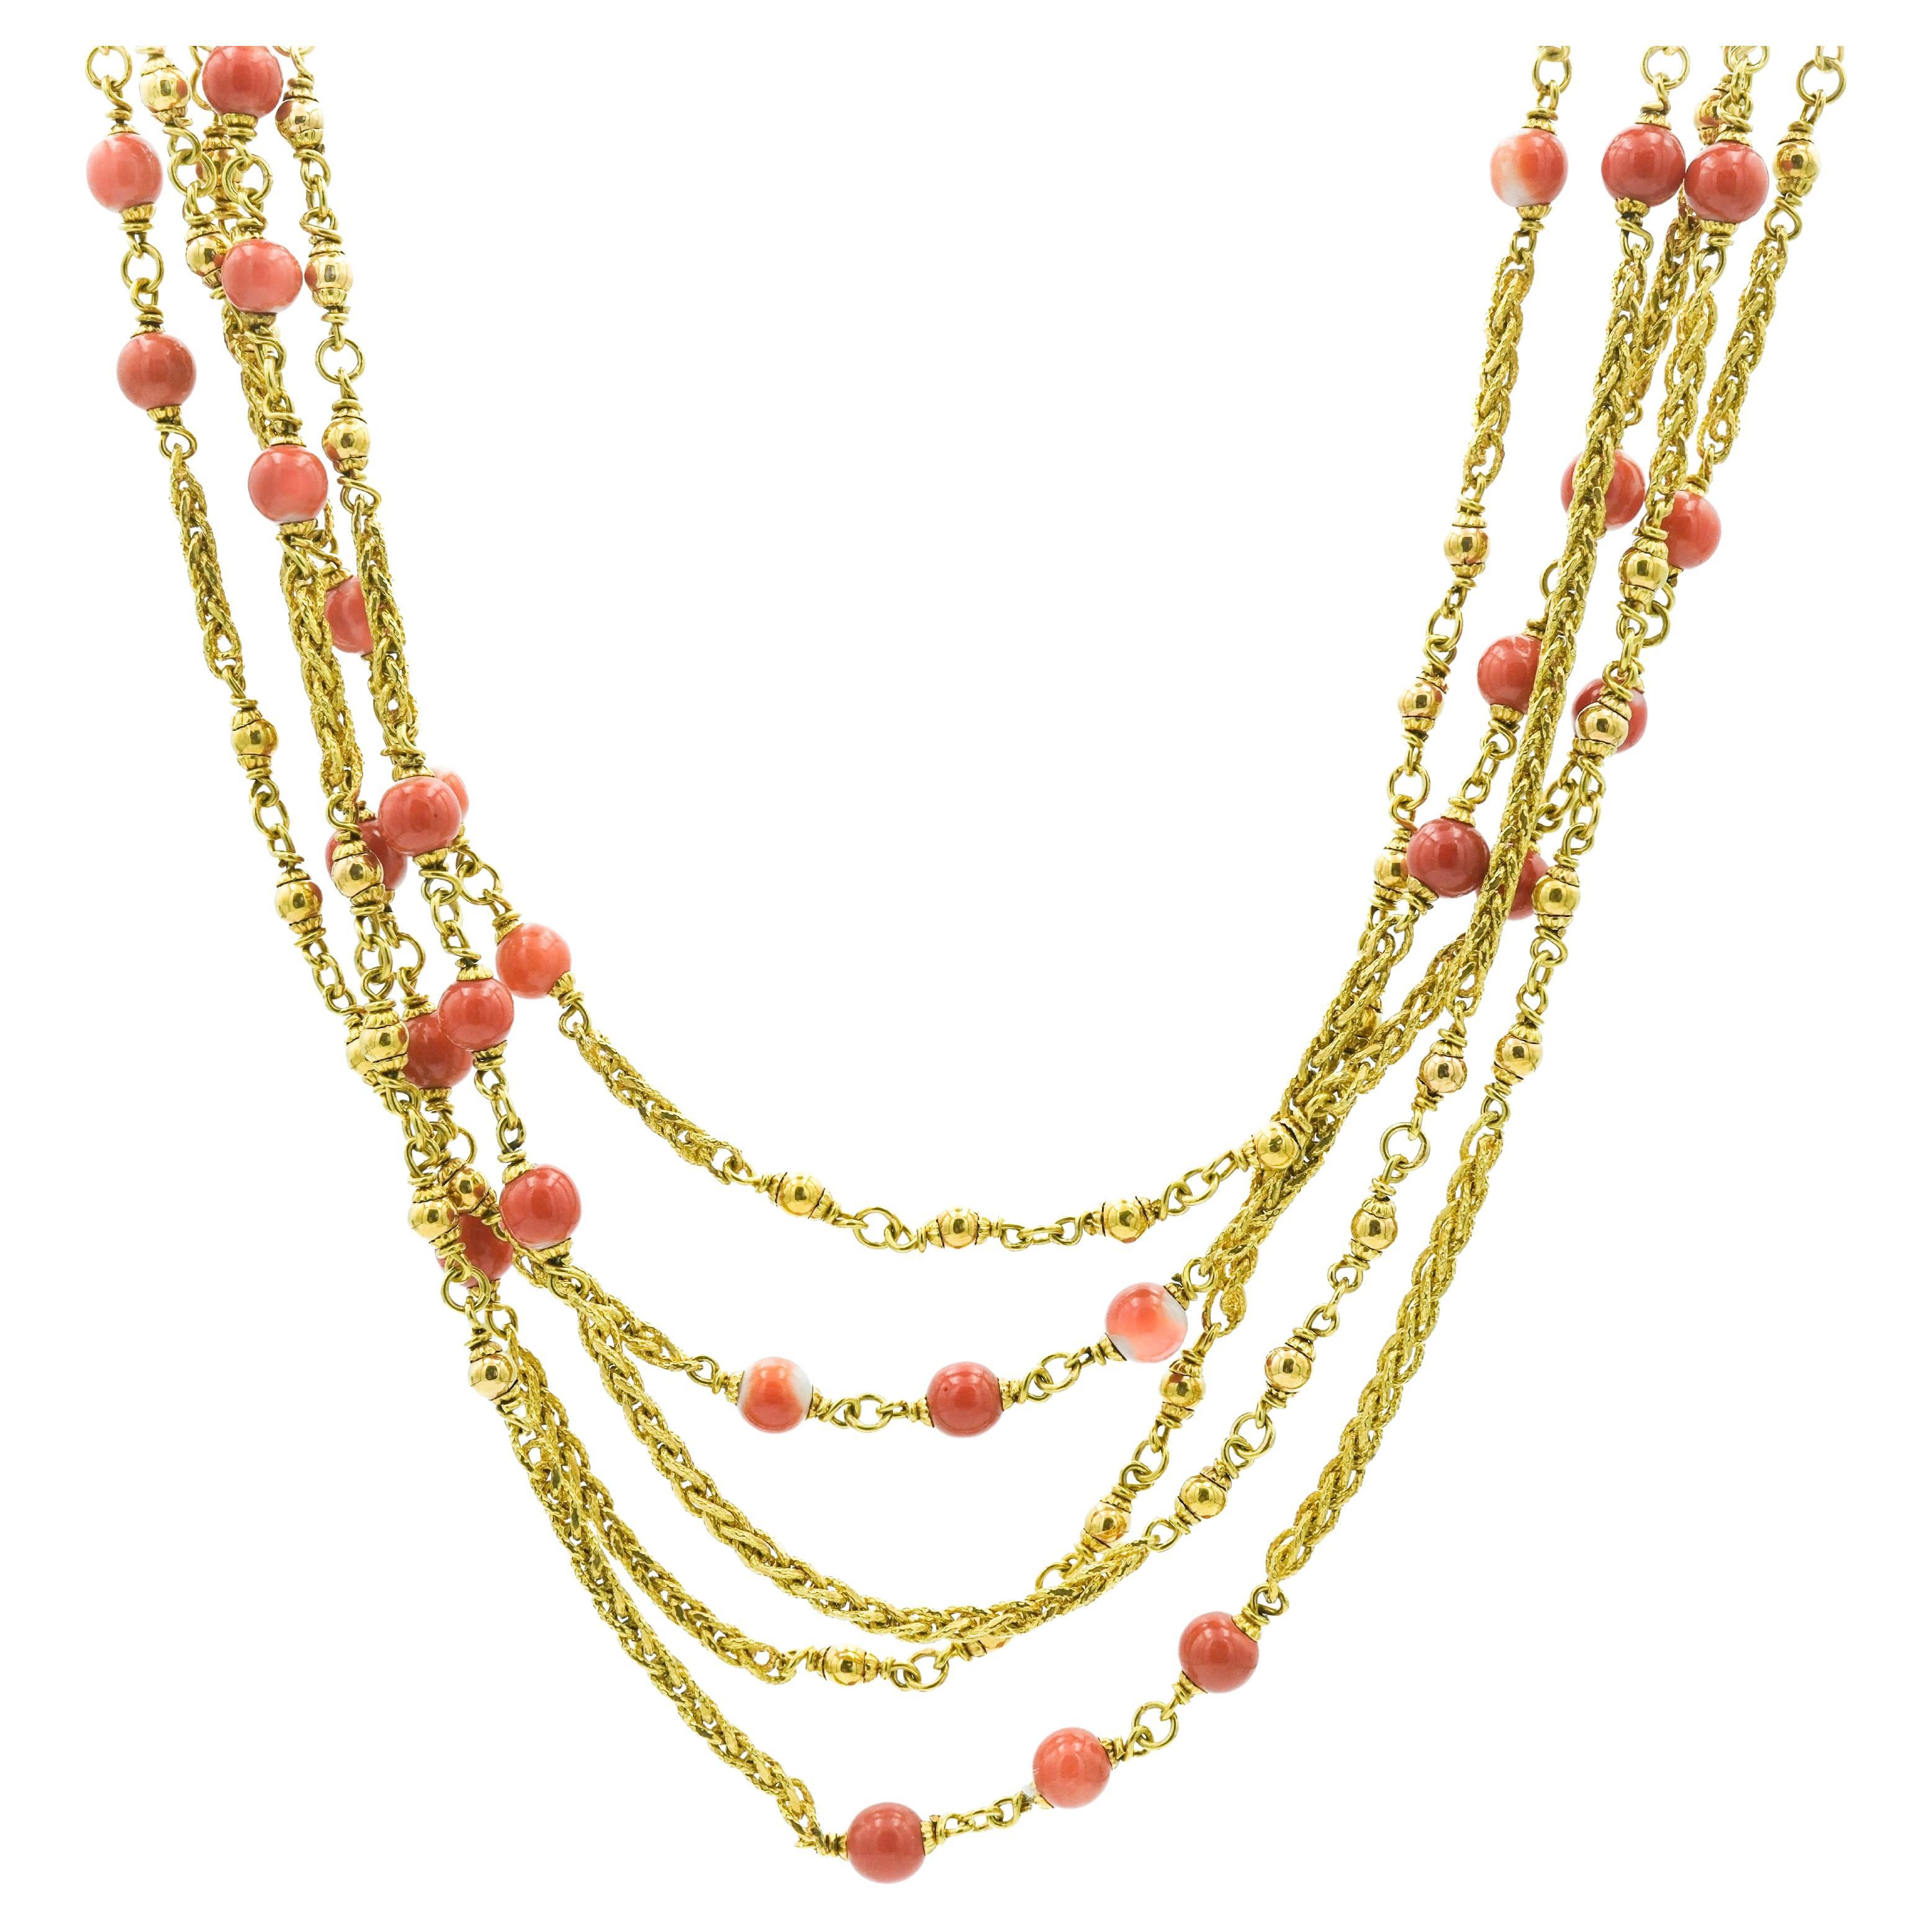 Vintage Retro 18 Karat Yellow Gold Beaded Coral Multi-String Layered Necklace For Sale